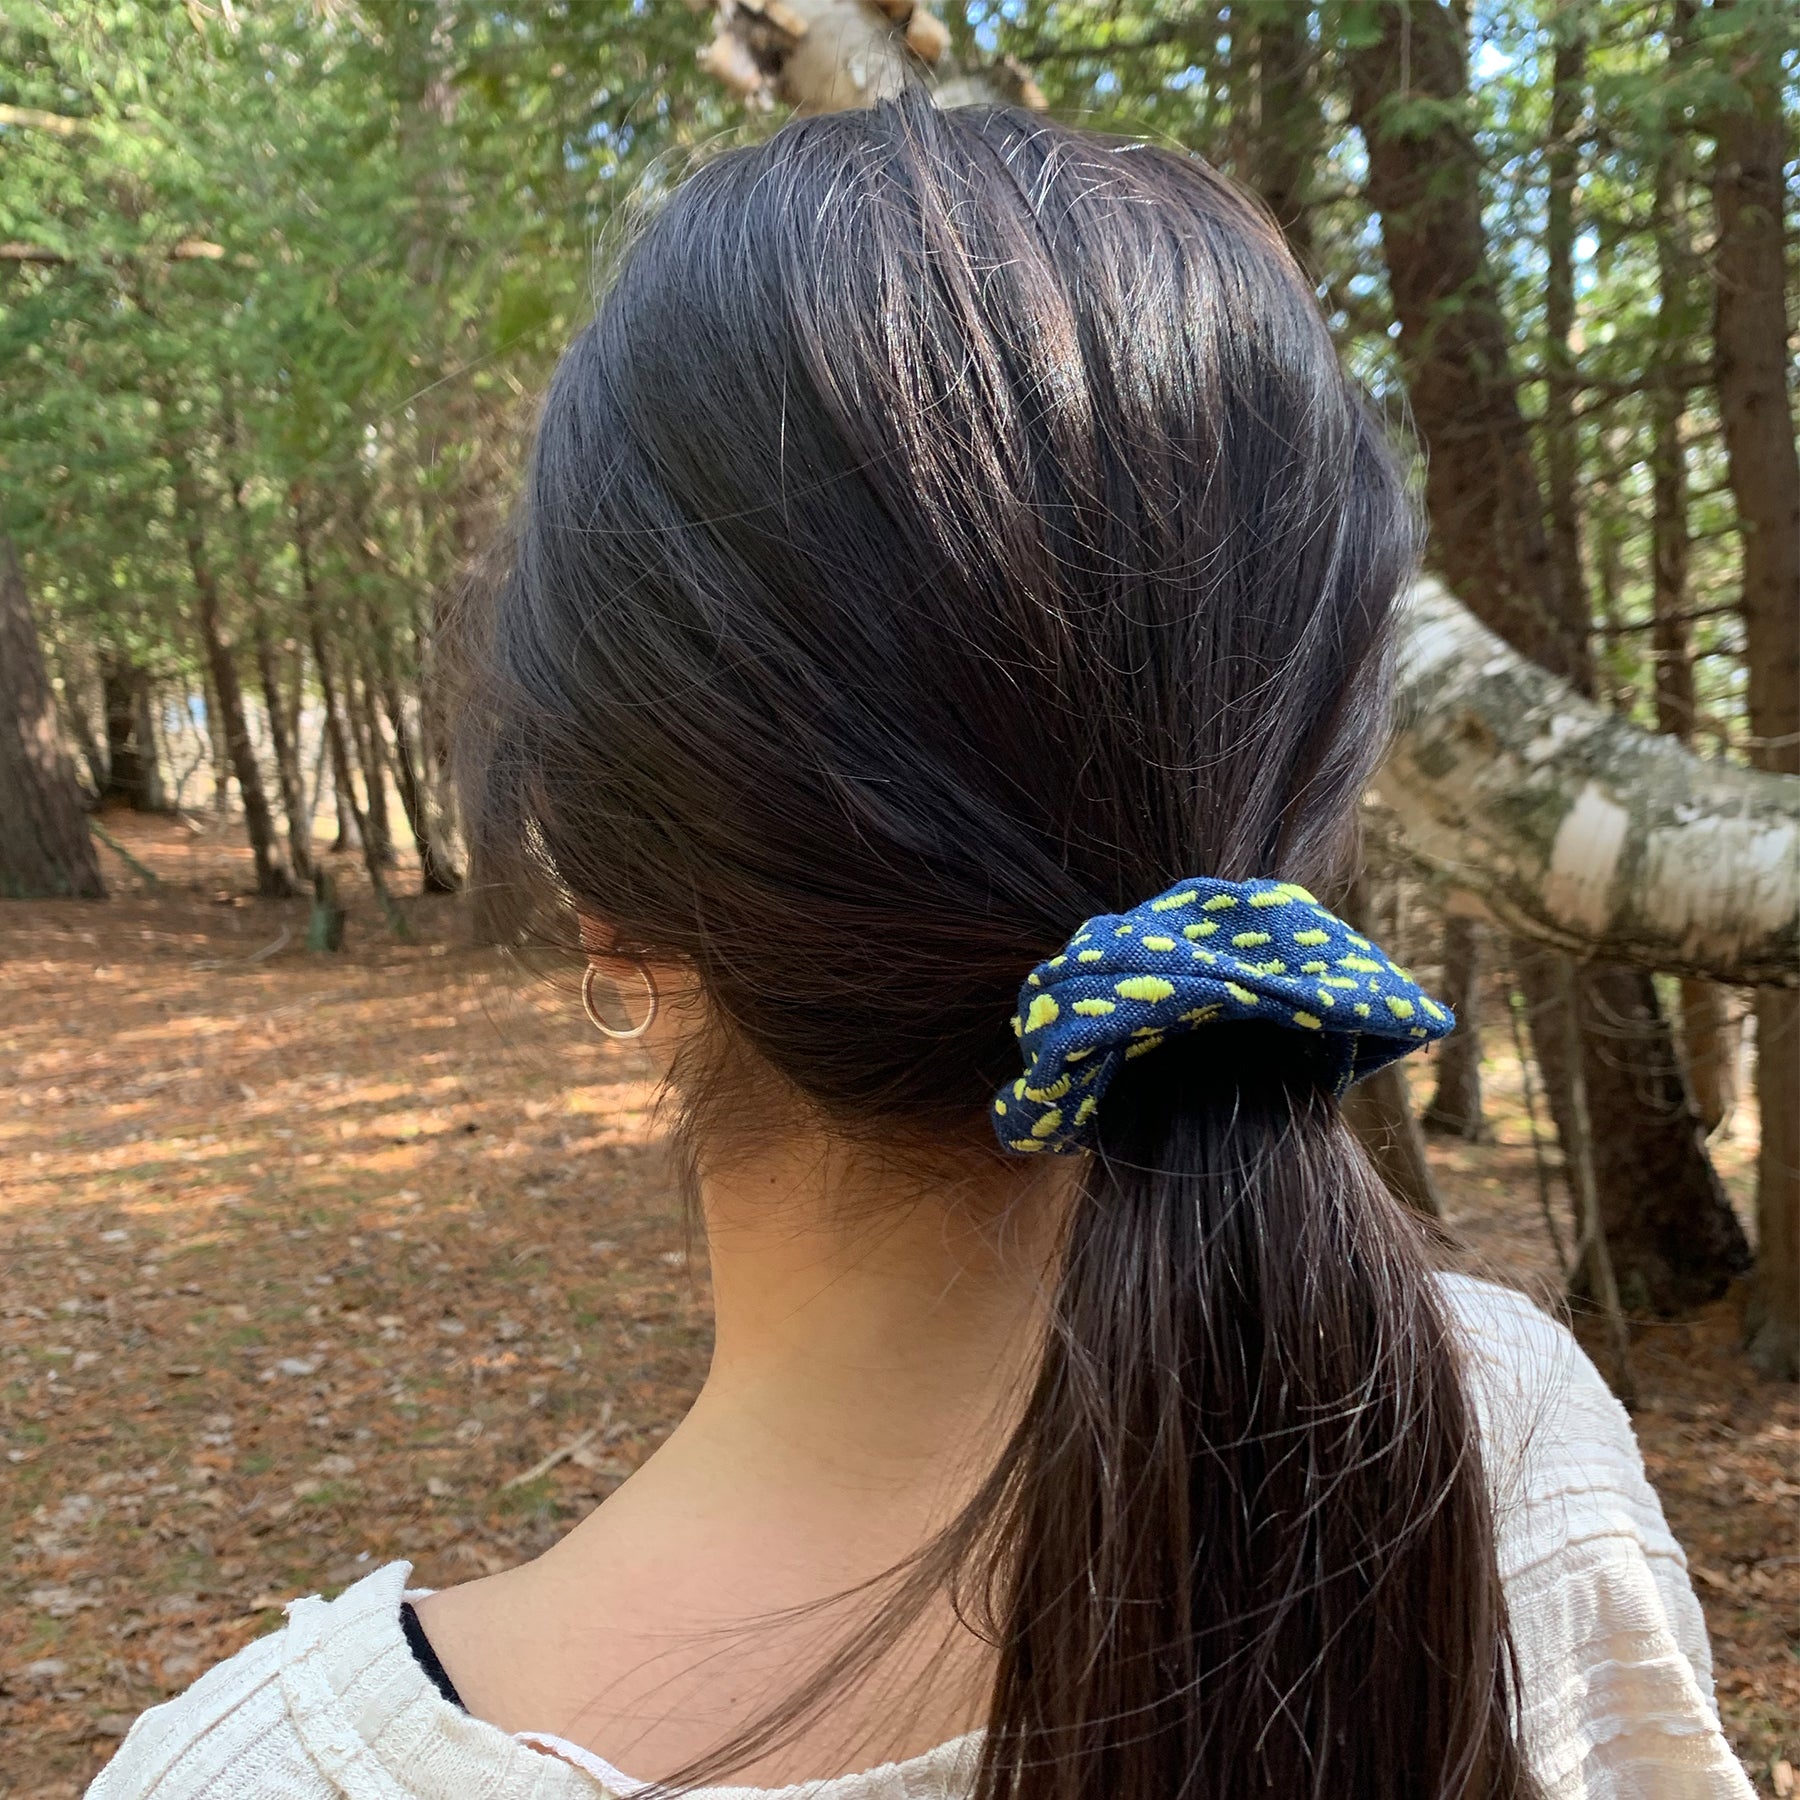 Denim Scrunchie with Lime Green Spots